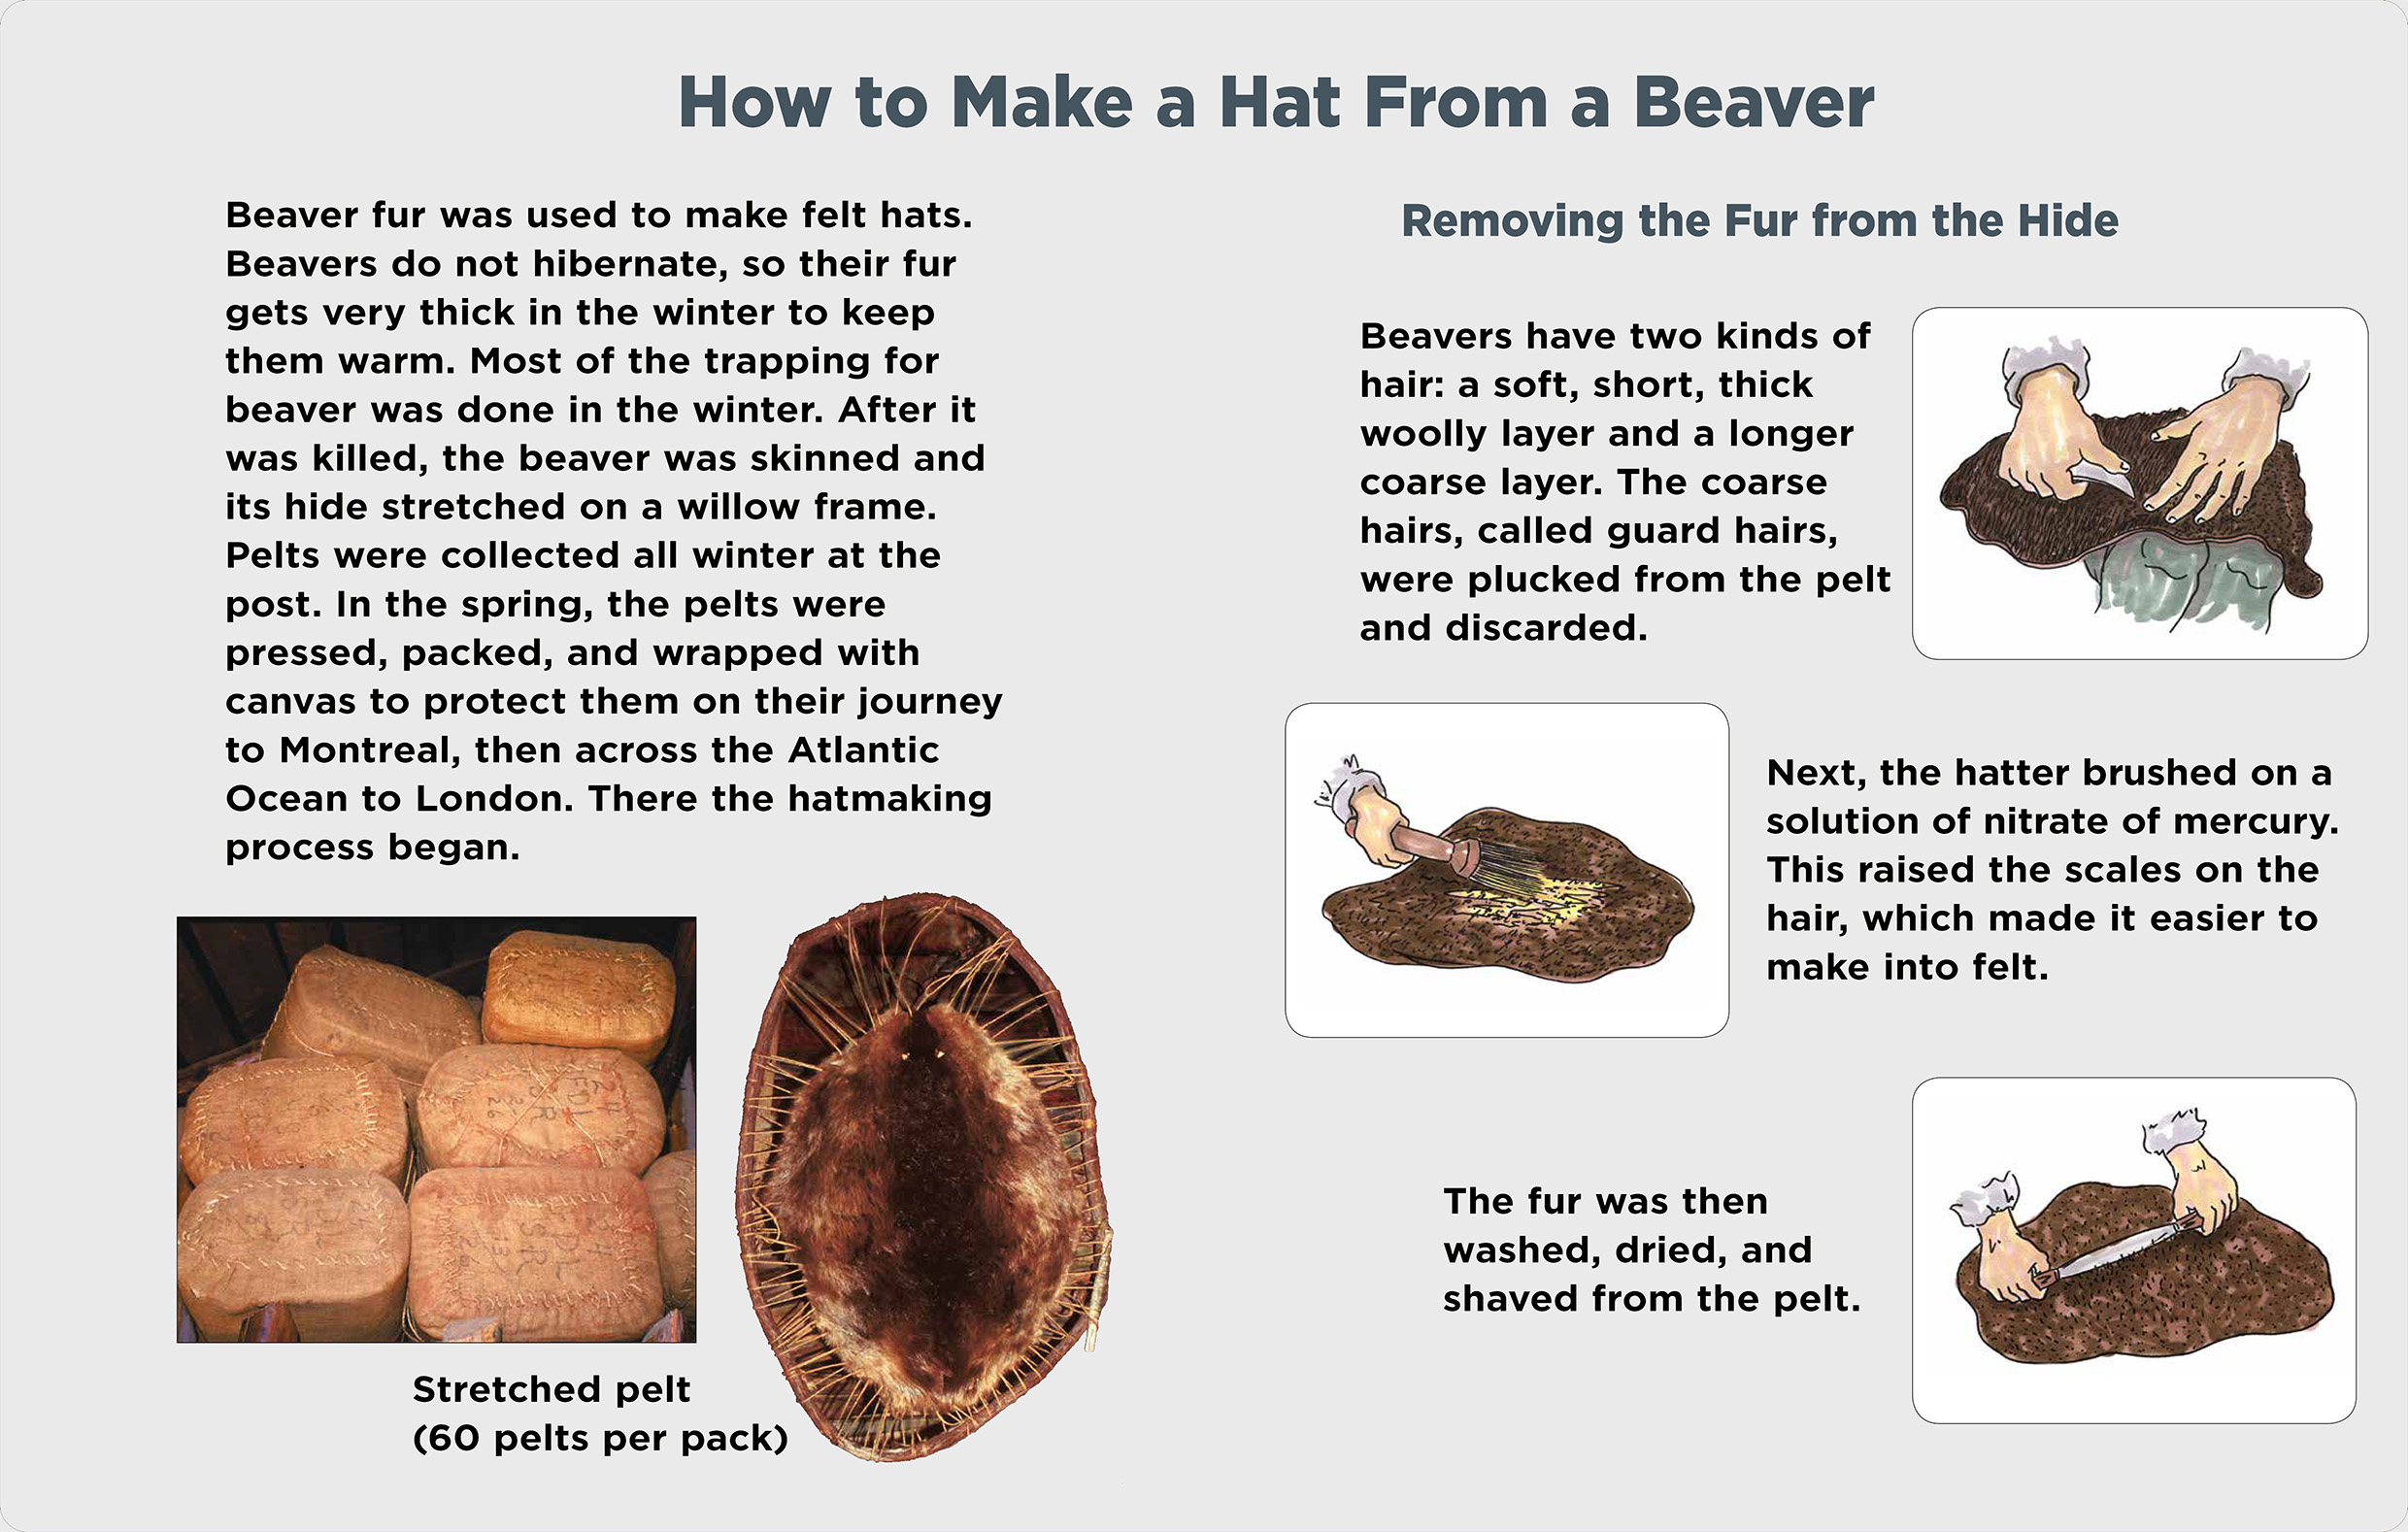 Beaver fur was used to make felt hats. Beavers do not hibernate, so their fur gets very thick in the winter to keep them warm. Most of the trapping for beaver was done in the winter. After it was killed, the beaver was skinned and its hide stretched on a willow frame. Pelts were collected all winter at the post. In the spring, the pelts were pressed, packed, and wrapped with canvas to protect them on their journey to Montreal, then across the Atlantic Ocean to London. There the hatmaking process began. Stretched pelt (60 pelts per pack) Removing the Fur from the Hide Beavers have two kinds of hair: a soft, short, thick woolly layer and a longer coarse layer. The coarse hairs, called guard hairs, were plucked from the pelt and discarded. Next, the hatter brushed on a solution of nitrate of mercury. This raised the scales on the hair, which made it easier to make into felt. The fur was then washed, dried, and shaved from the pelt.